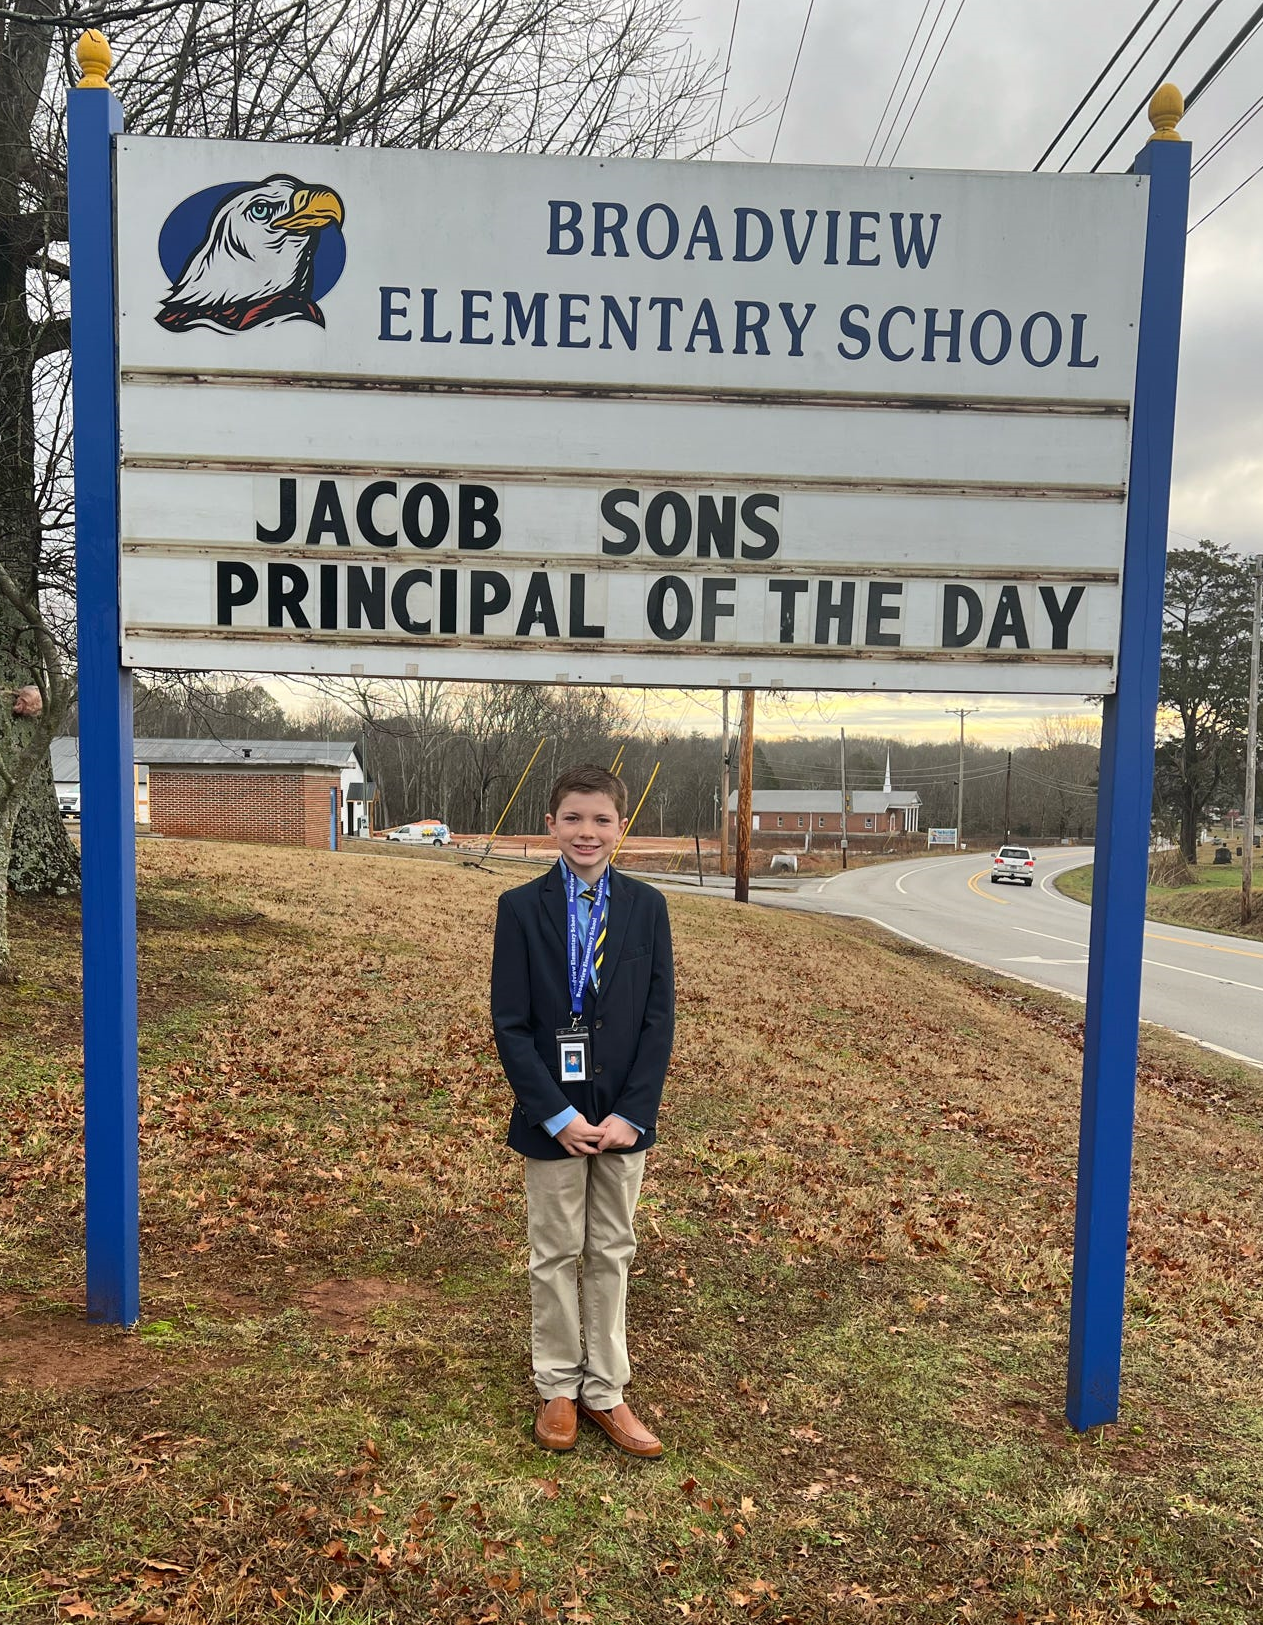 Jacob Sons was Principal for the Day for winning Broadview Elementaries school-wide Walk-a-Thon.